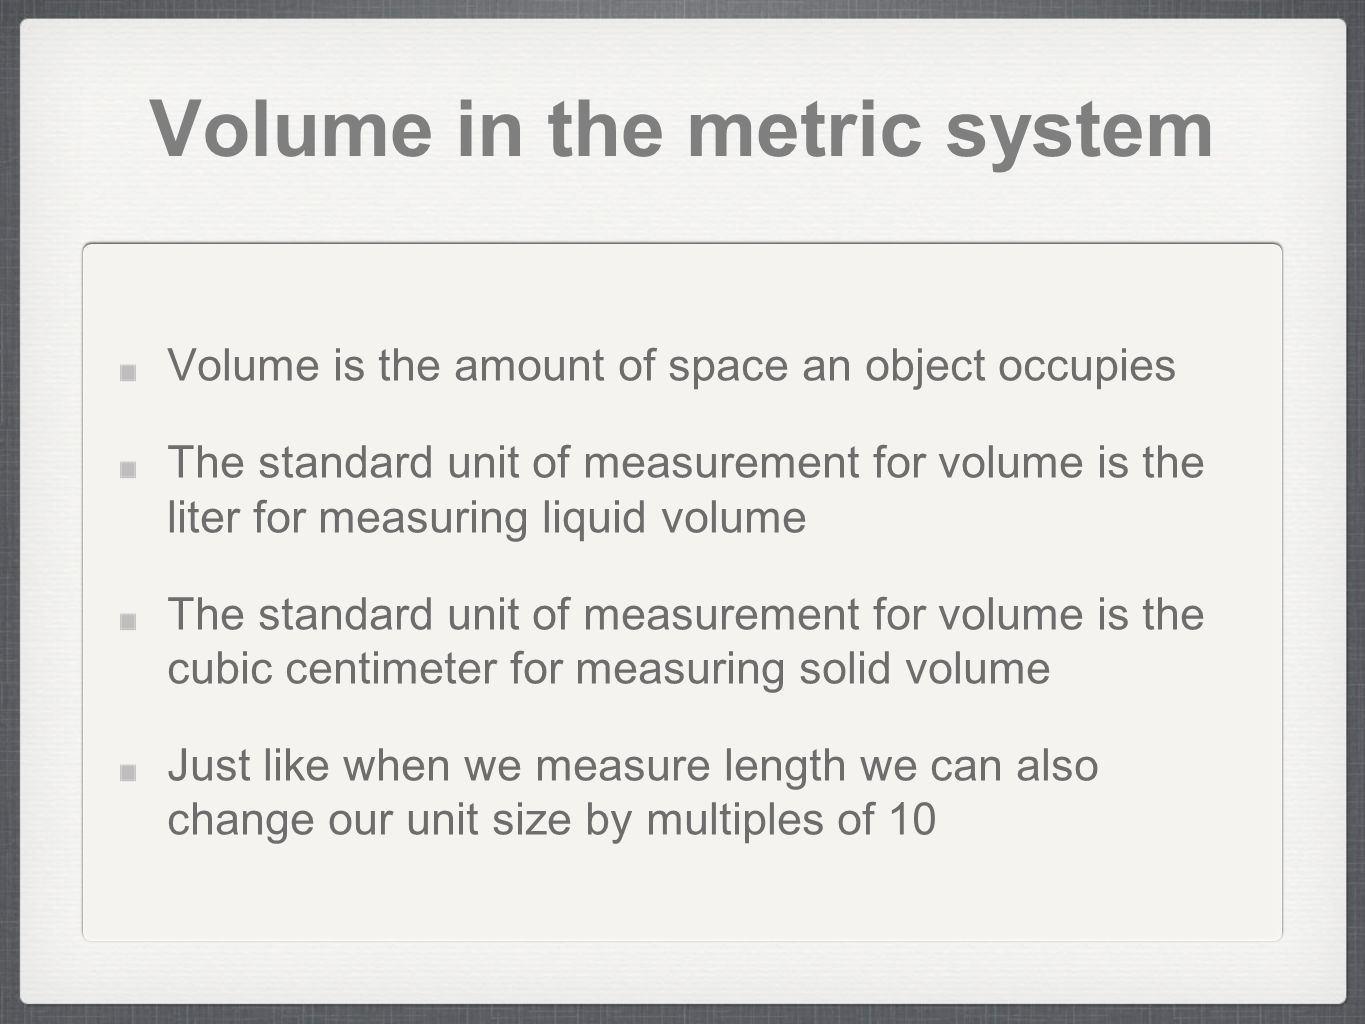 Volume in the metric system